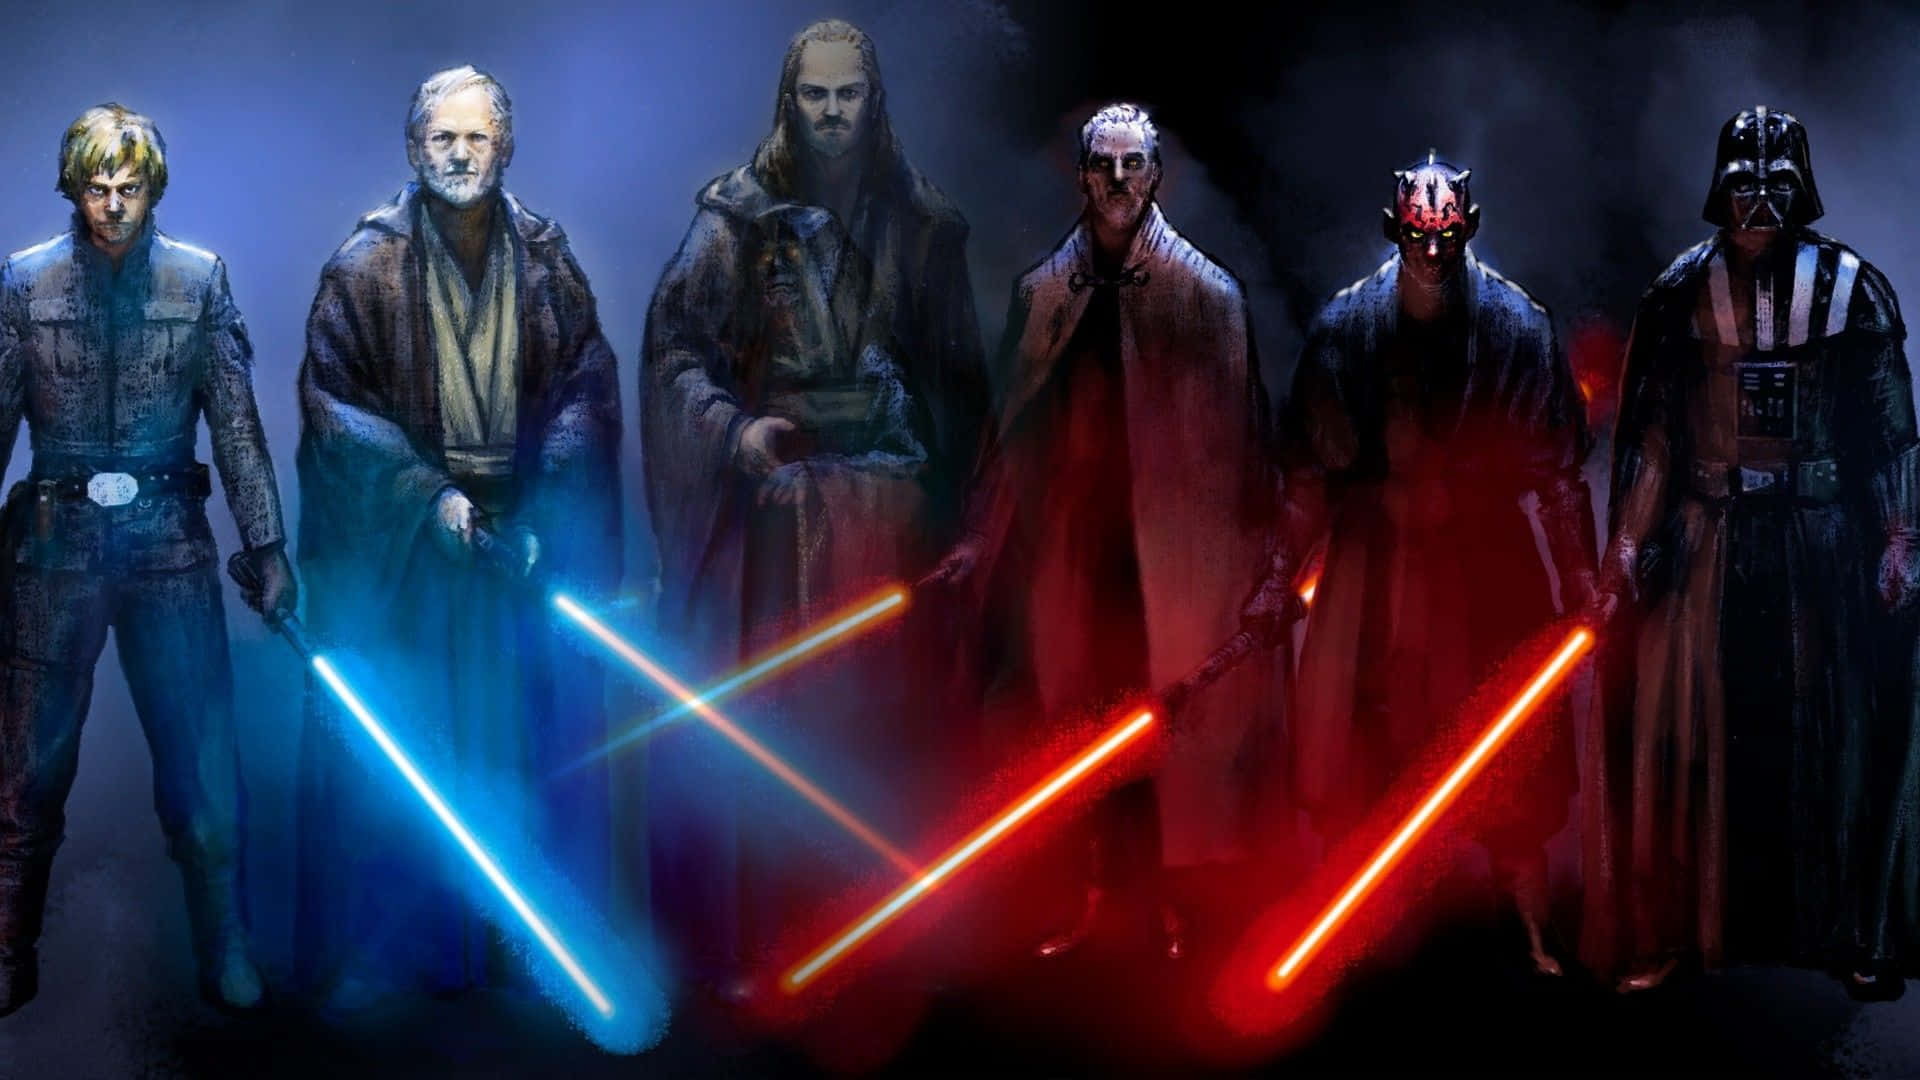 Members of the Jedi Council in a powerful discussion Wallpaper